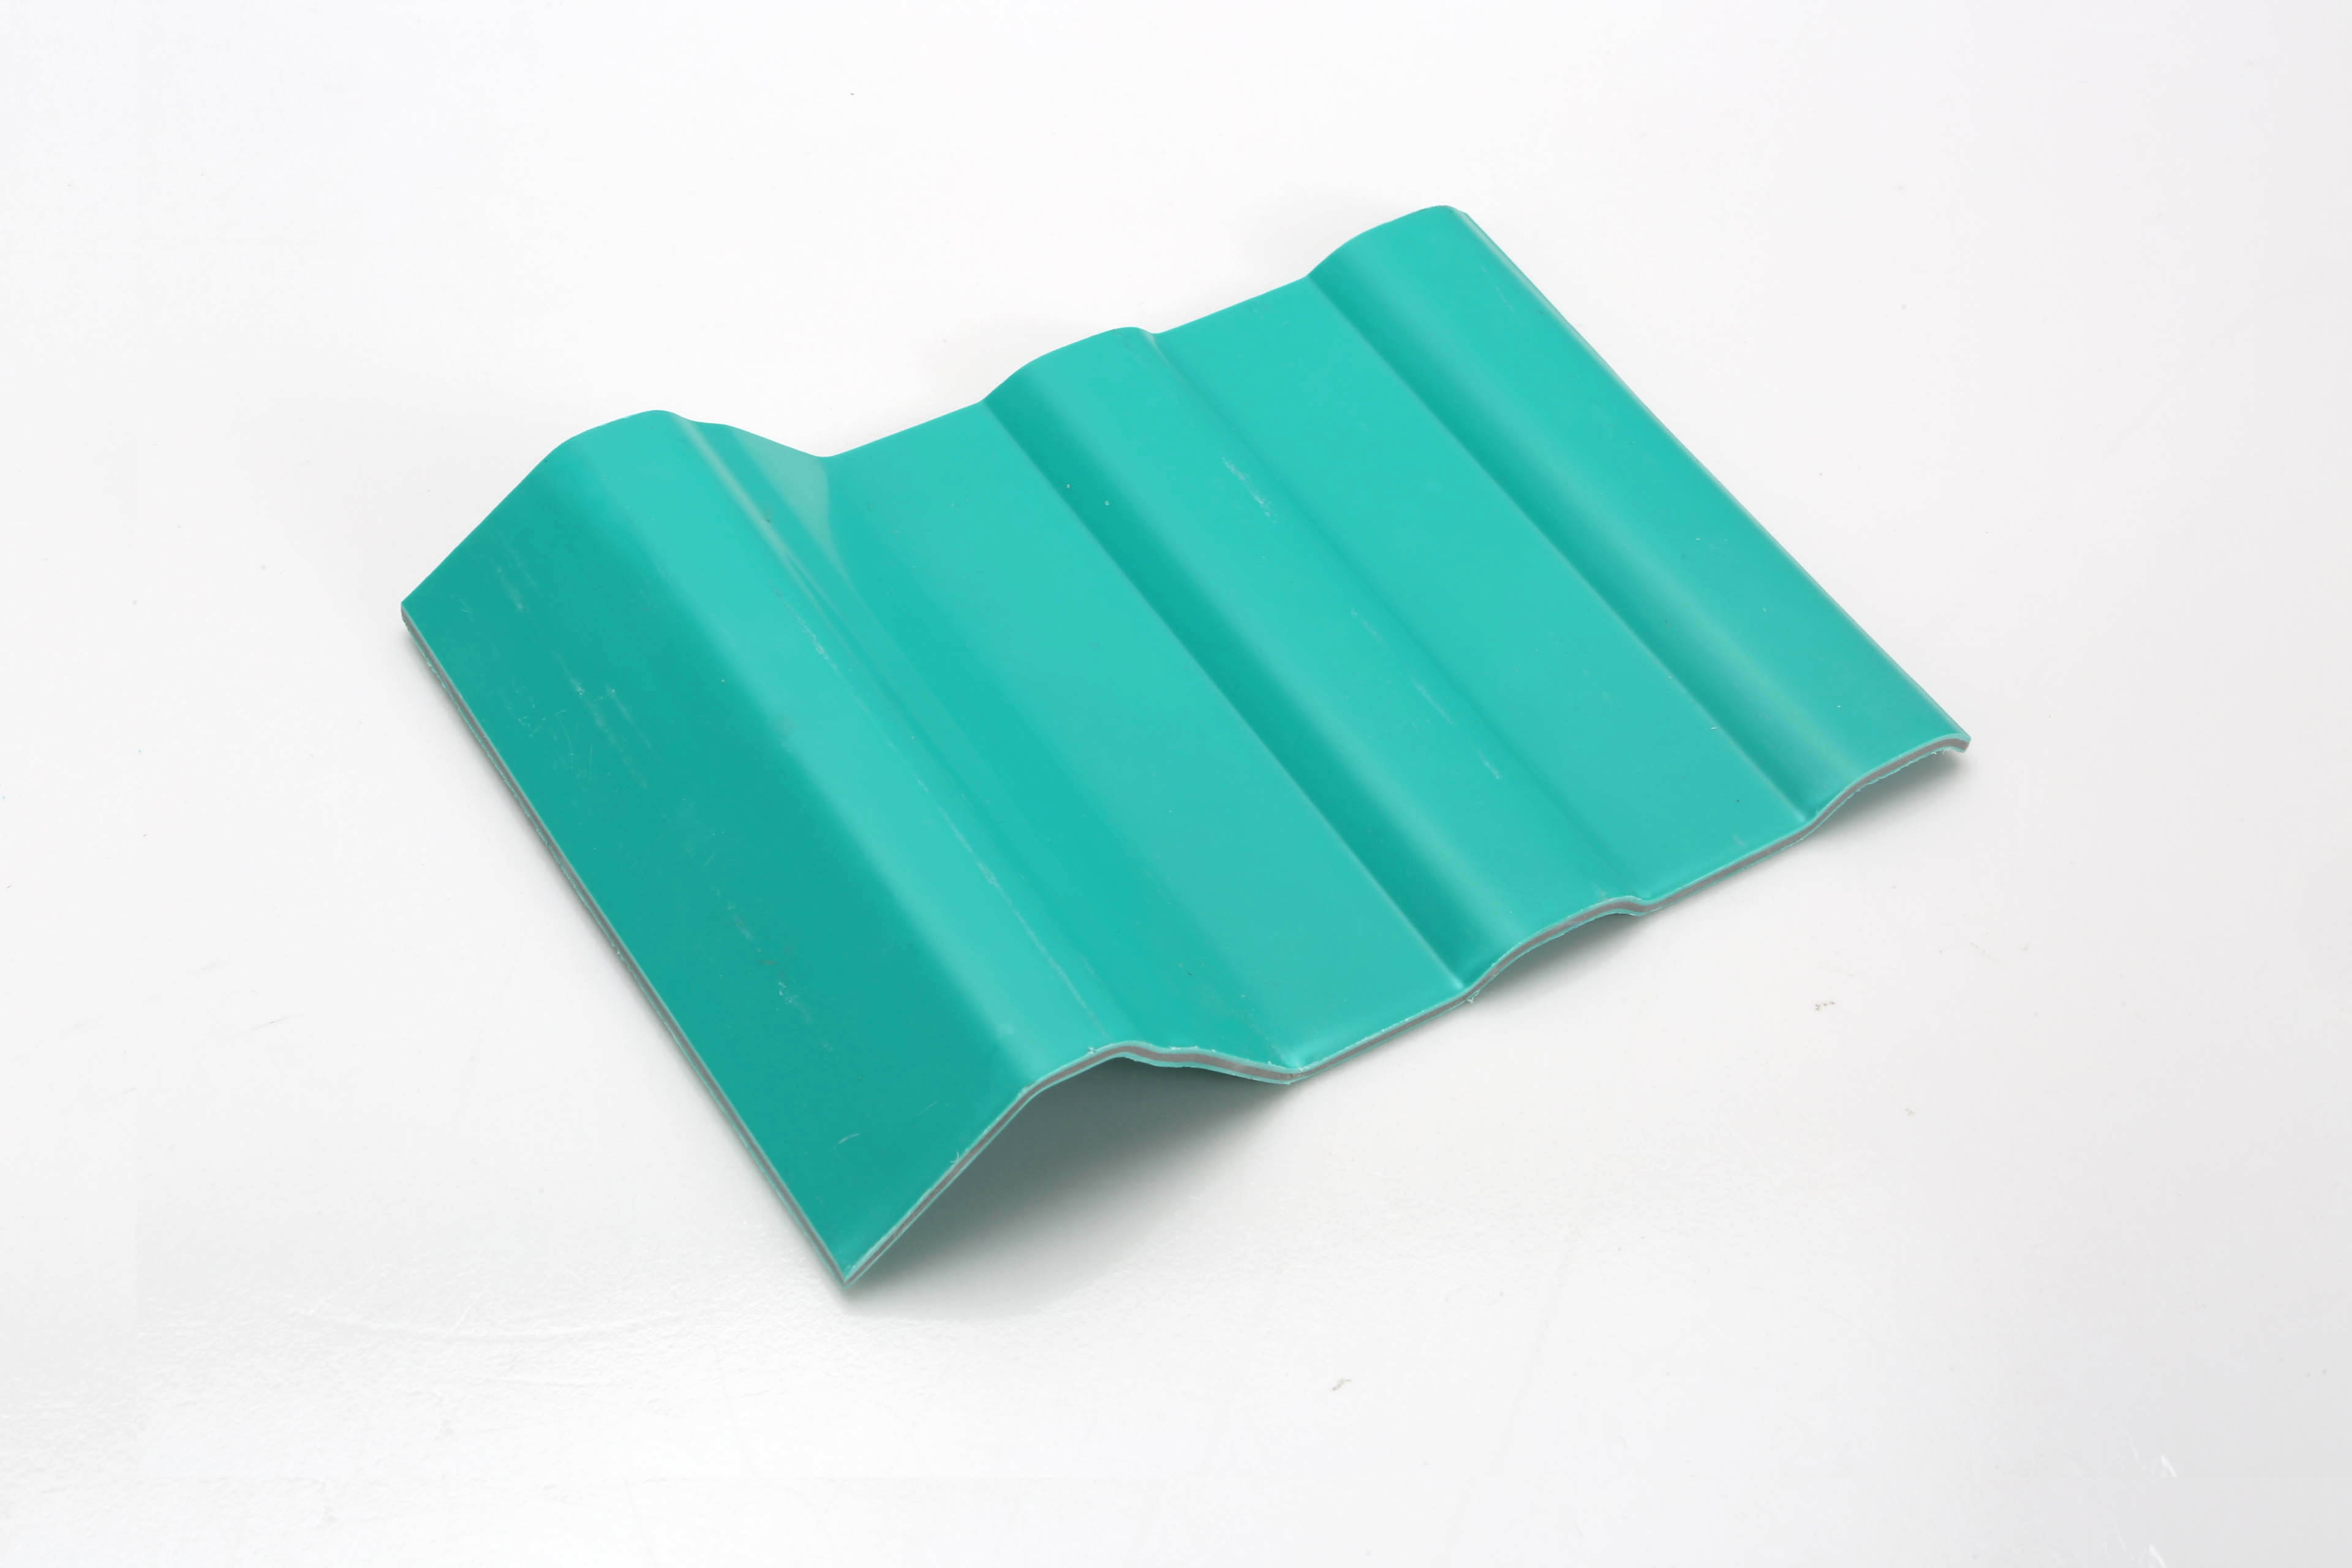 WHAT ARE THE ADVANTAGES OF PVC SHEET PRODUCTS COMPARED WITH OTHER MATERIALS